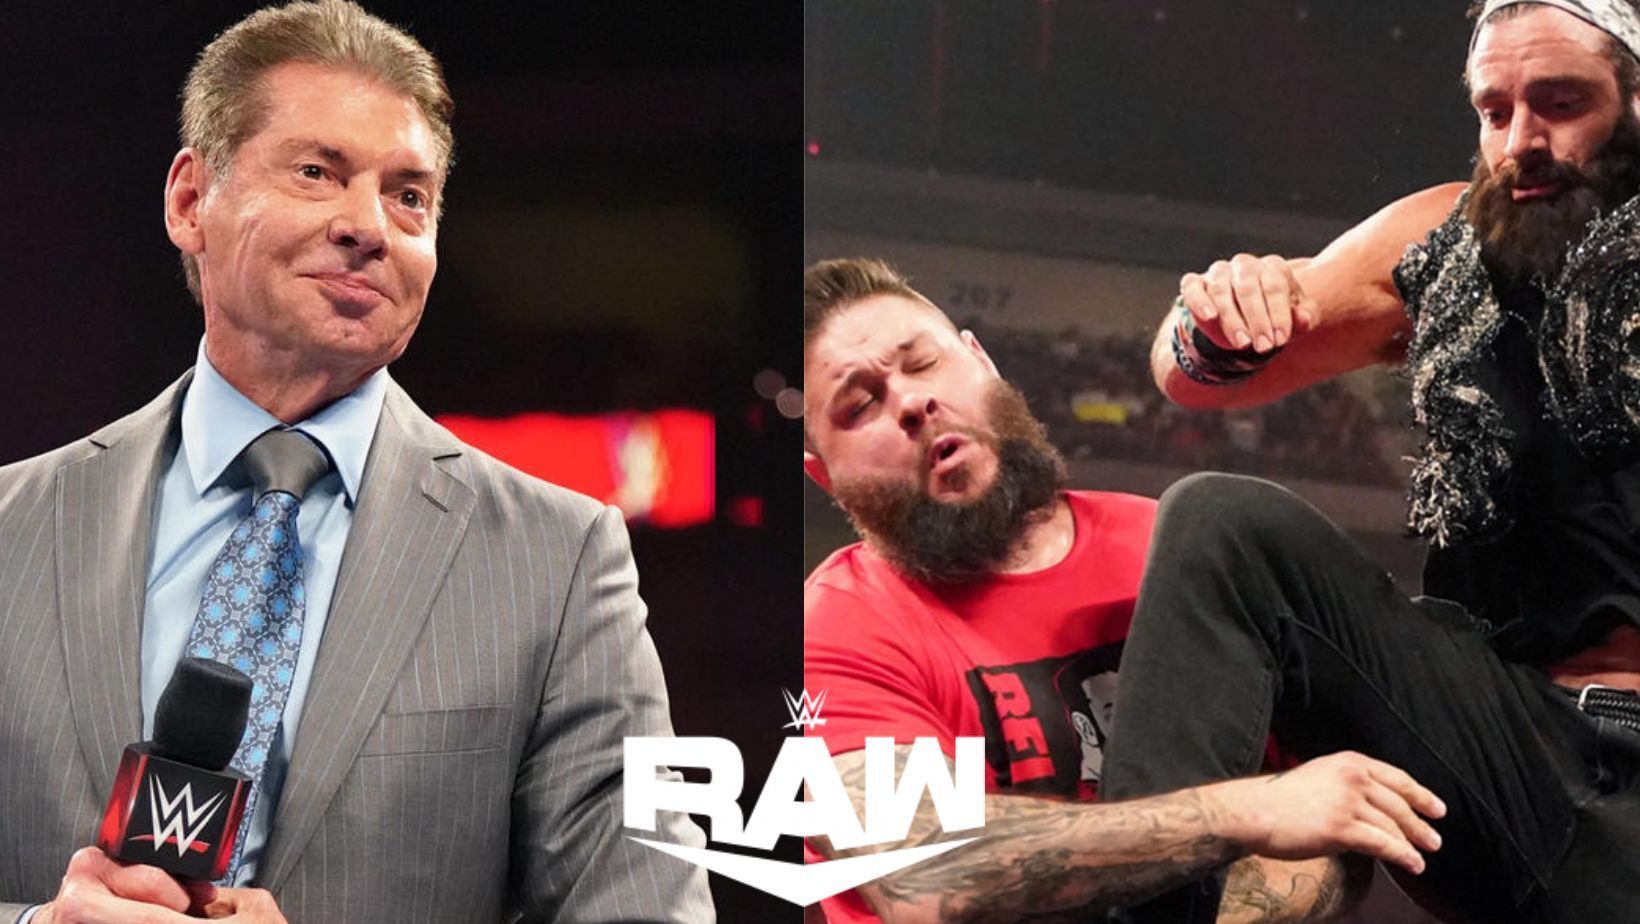 WWE RAW saw Vince McMahon appear following his appearance on SmackDown